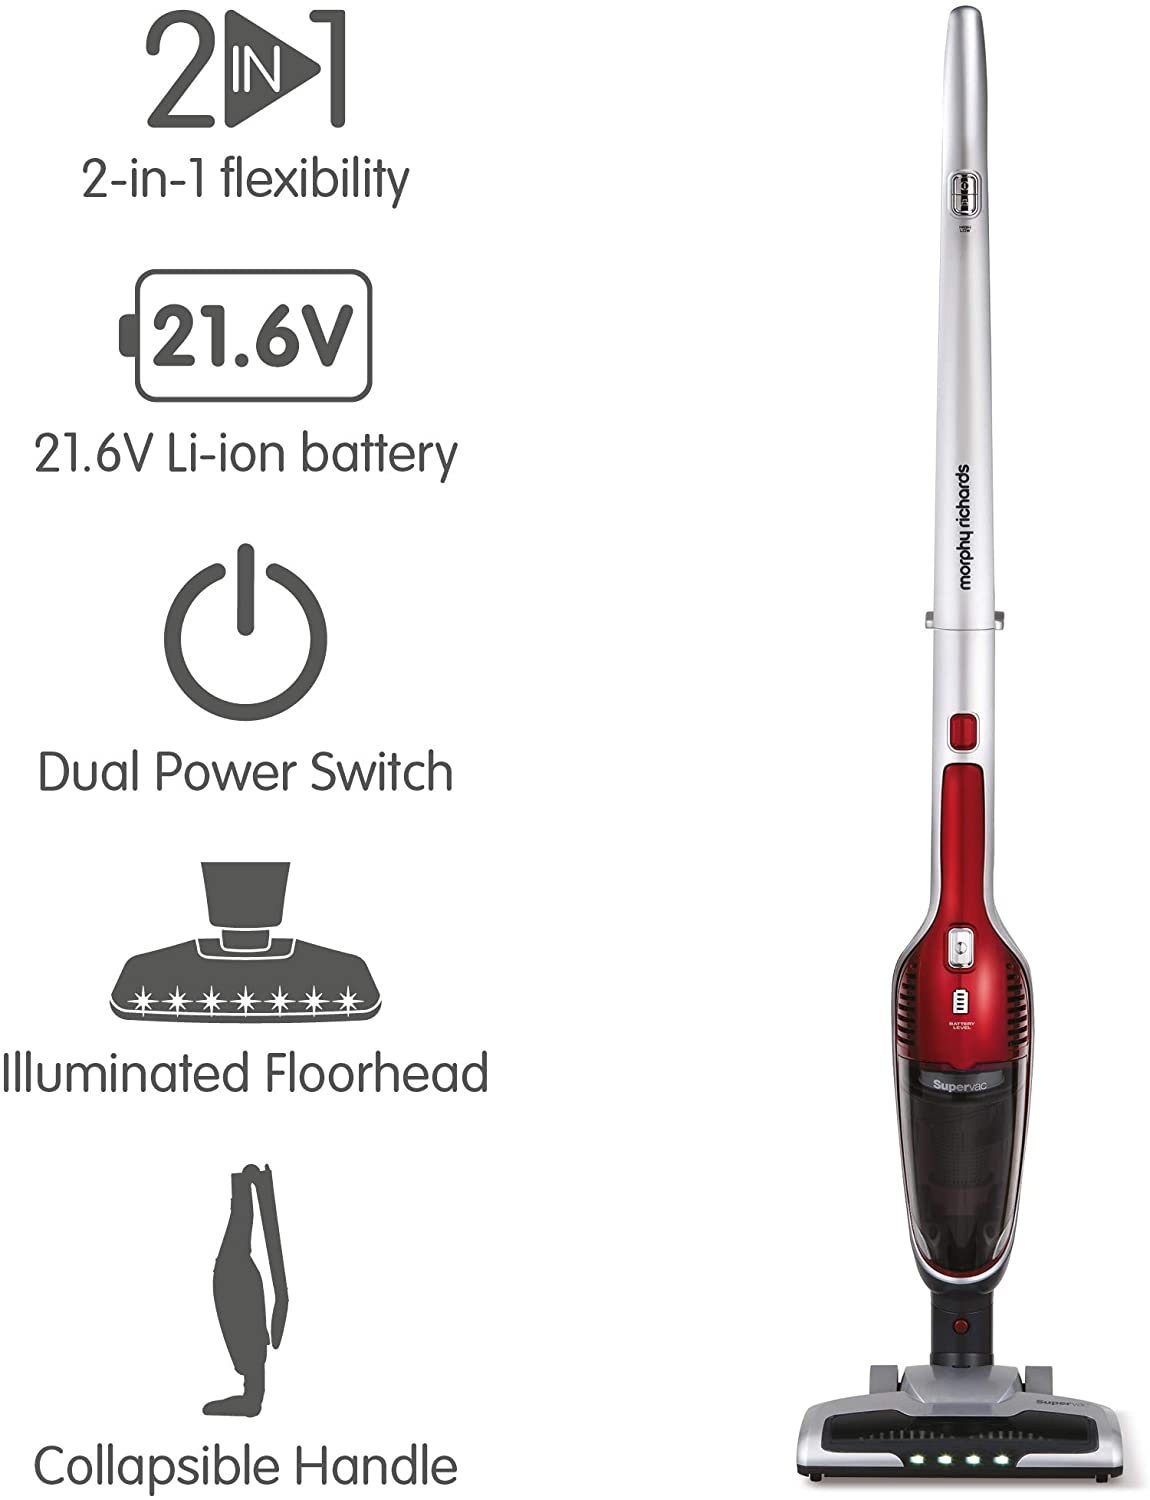 Morphy Richards Morphy Richards Supervac 2-in-1 cordless Vacuum Cleaner Red 